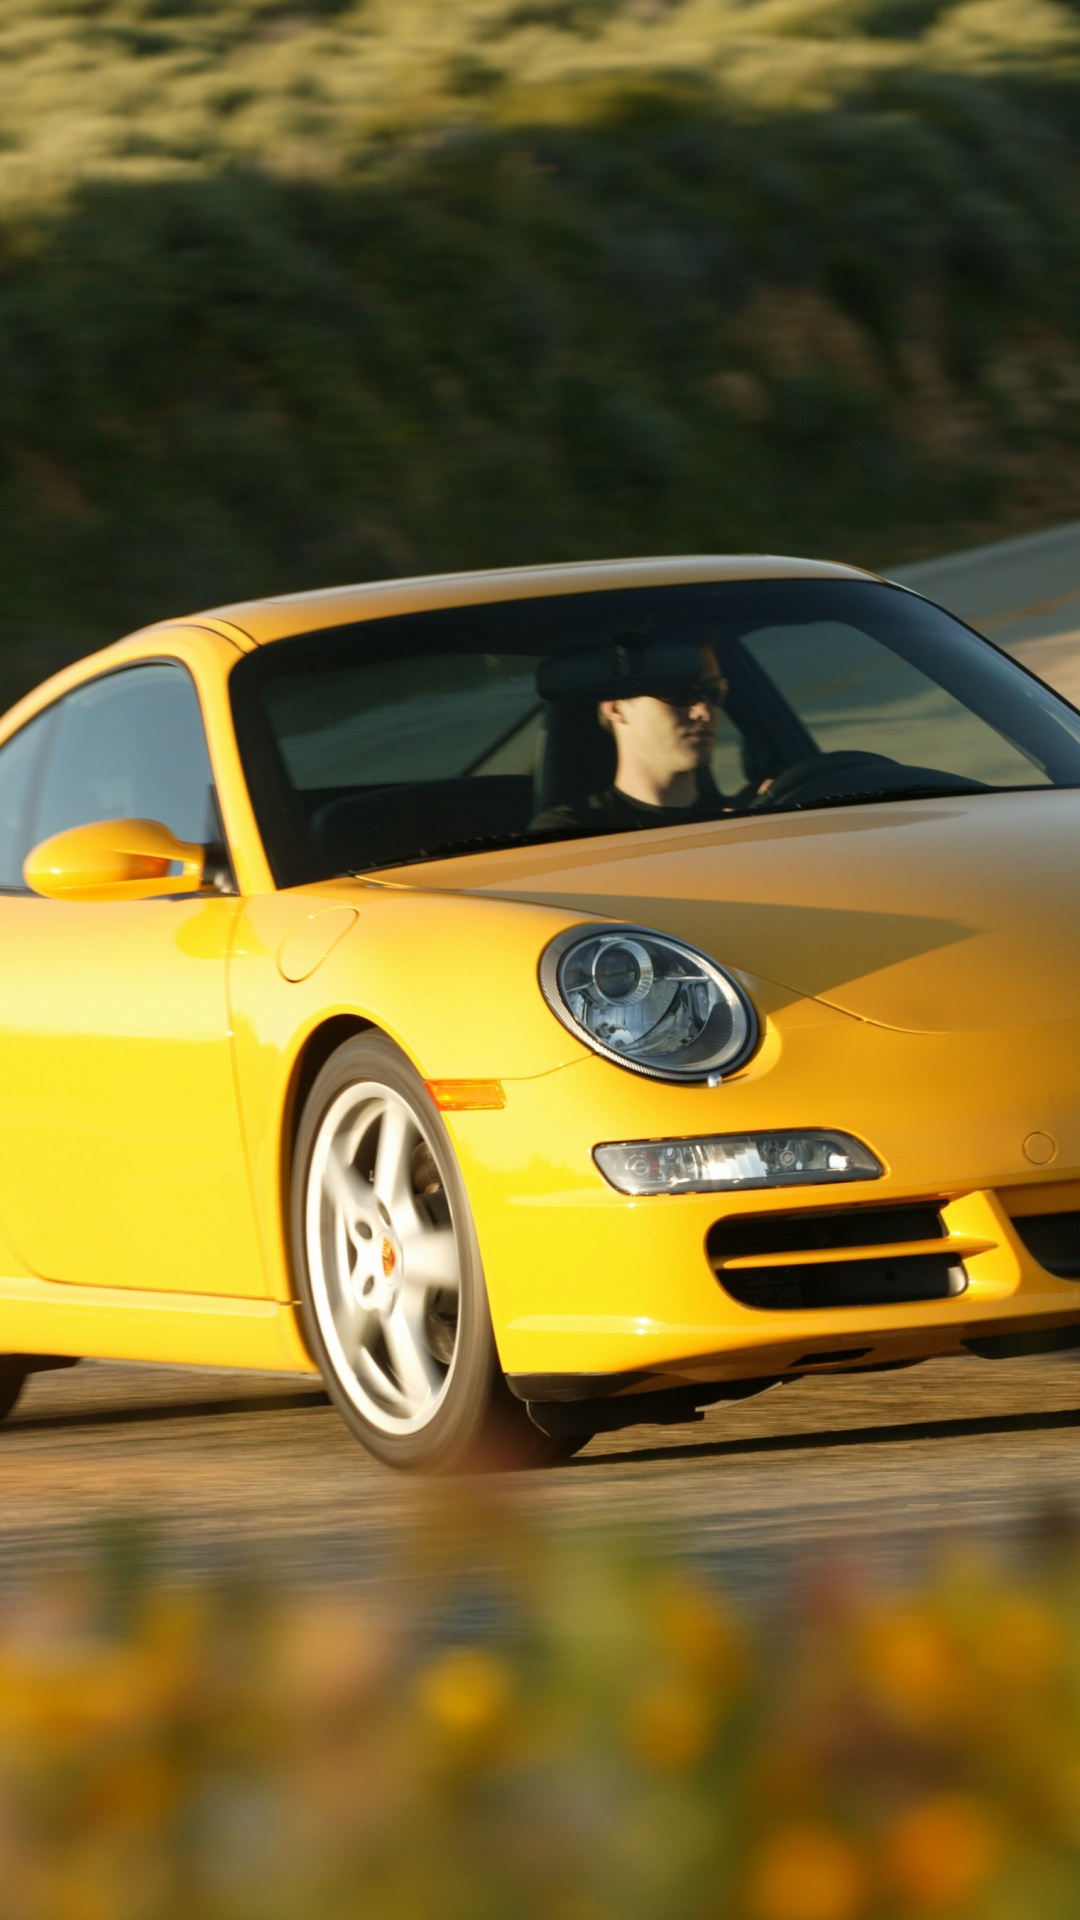 Yellow Porsche 911 on Road During Daytime. Wallpaper in 1080x1920 Resolution